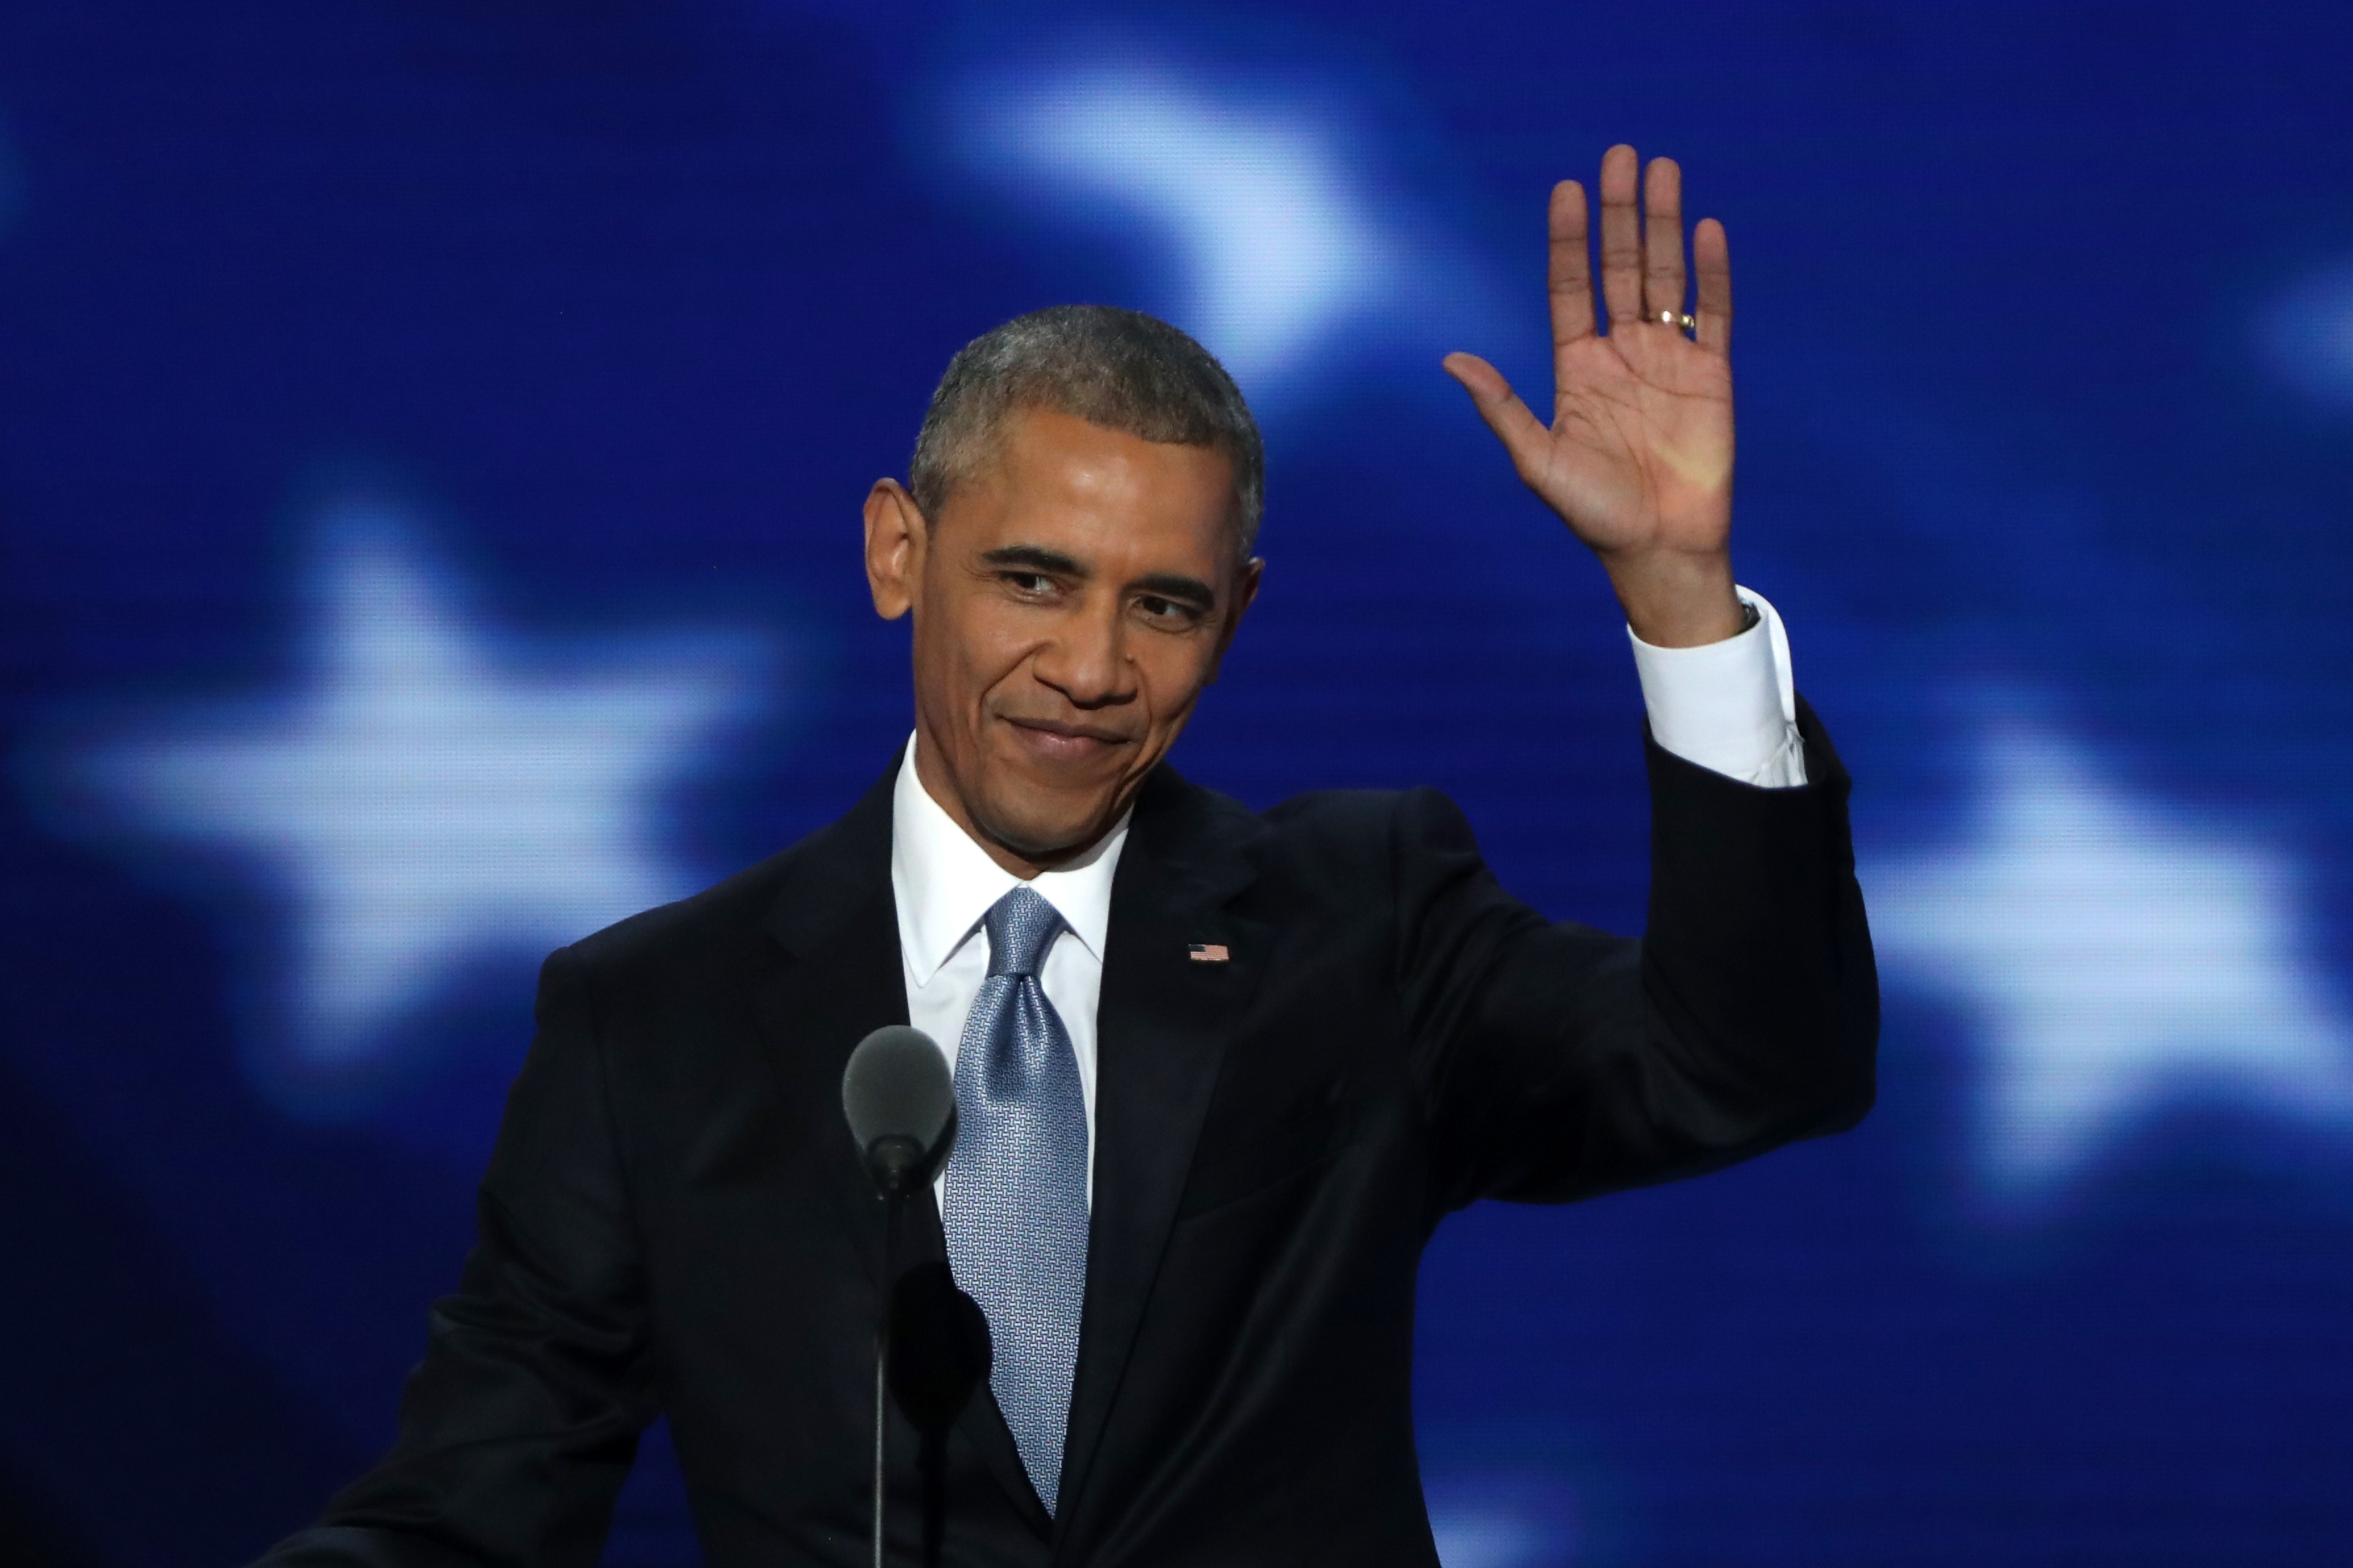 PHILADELPHIA, PA - JULY 27: US President Barack Obama acknowledges the crowd as he arrives on stage to deliver remarks on the third day of the Democratic National Convention at the Wells Fargo Center, July 27, 2016 in Philadelphia, Pennsylvania. Democratic presidential candidate Hillary Clinton received the number of votes needed to secure the party's nomination. An estimated 50,000 people are expected in Philadelphia, including hundreds of protesters and members of the media. The four-day Democratic National Convention kicked off July 25. (Photo by Alex Wong/Getty Images)